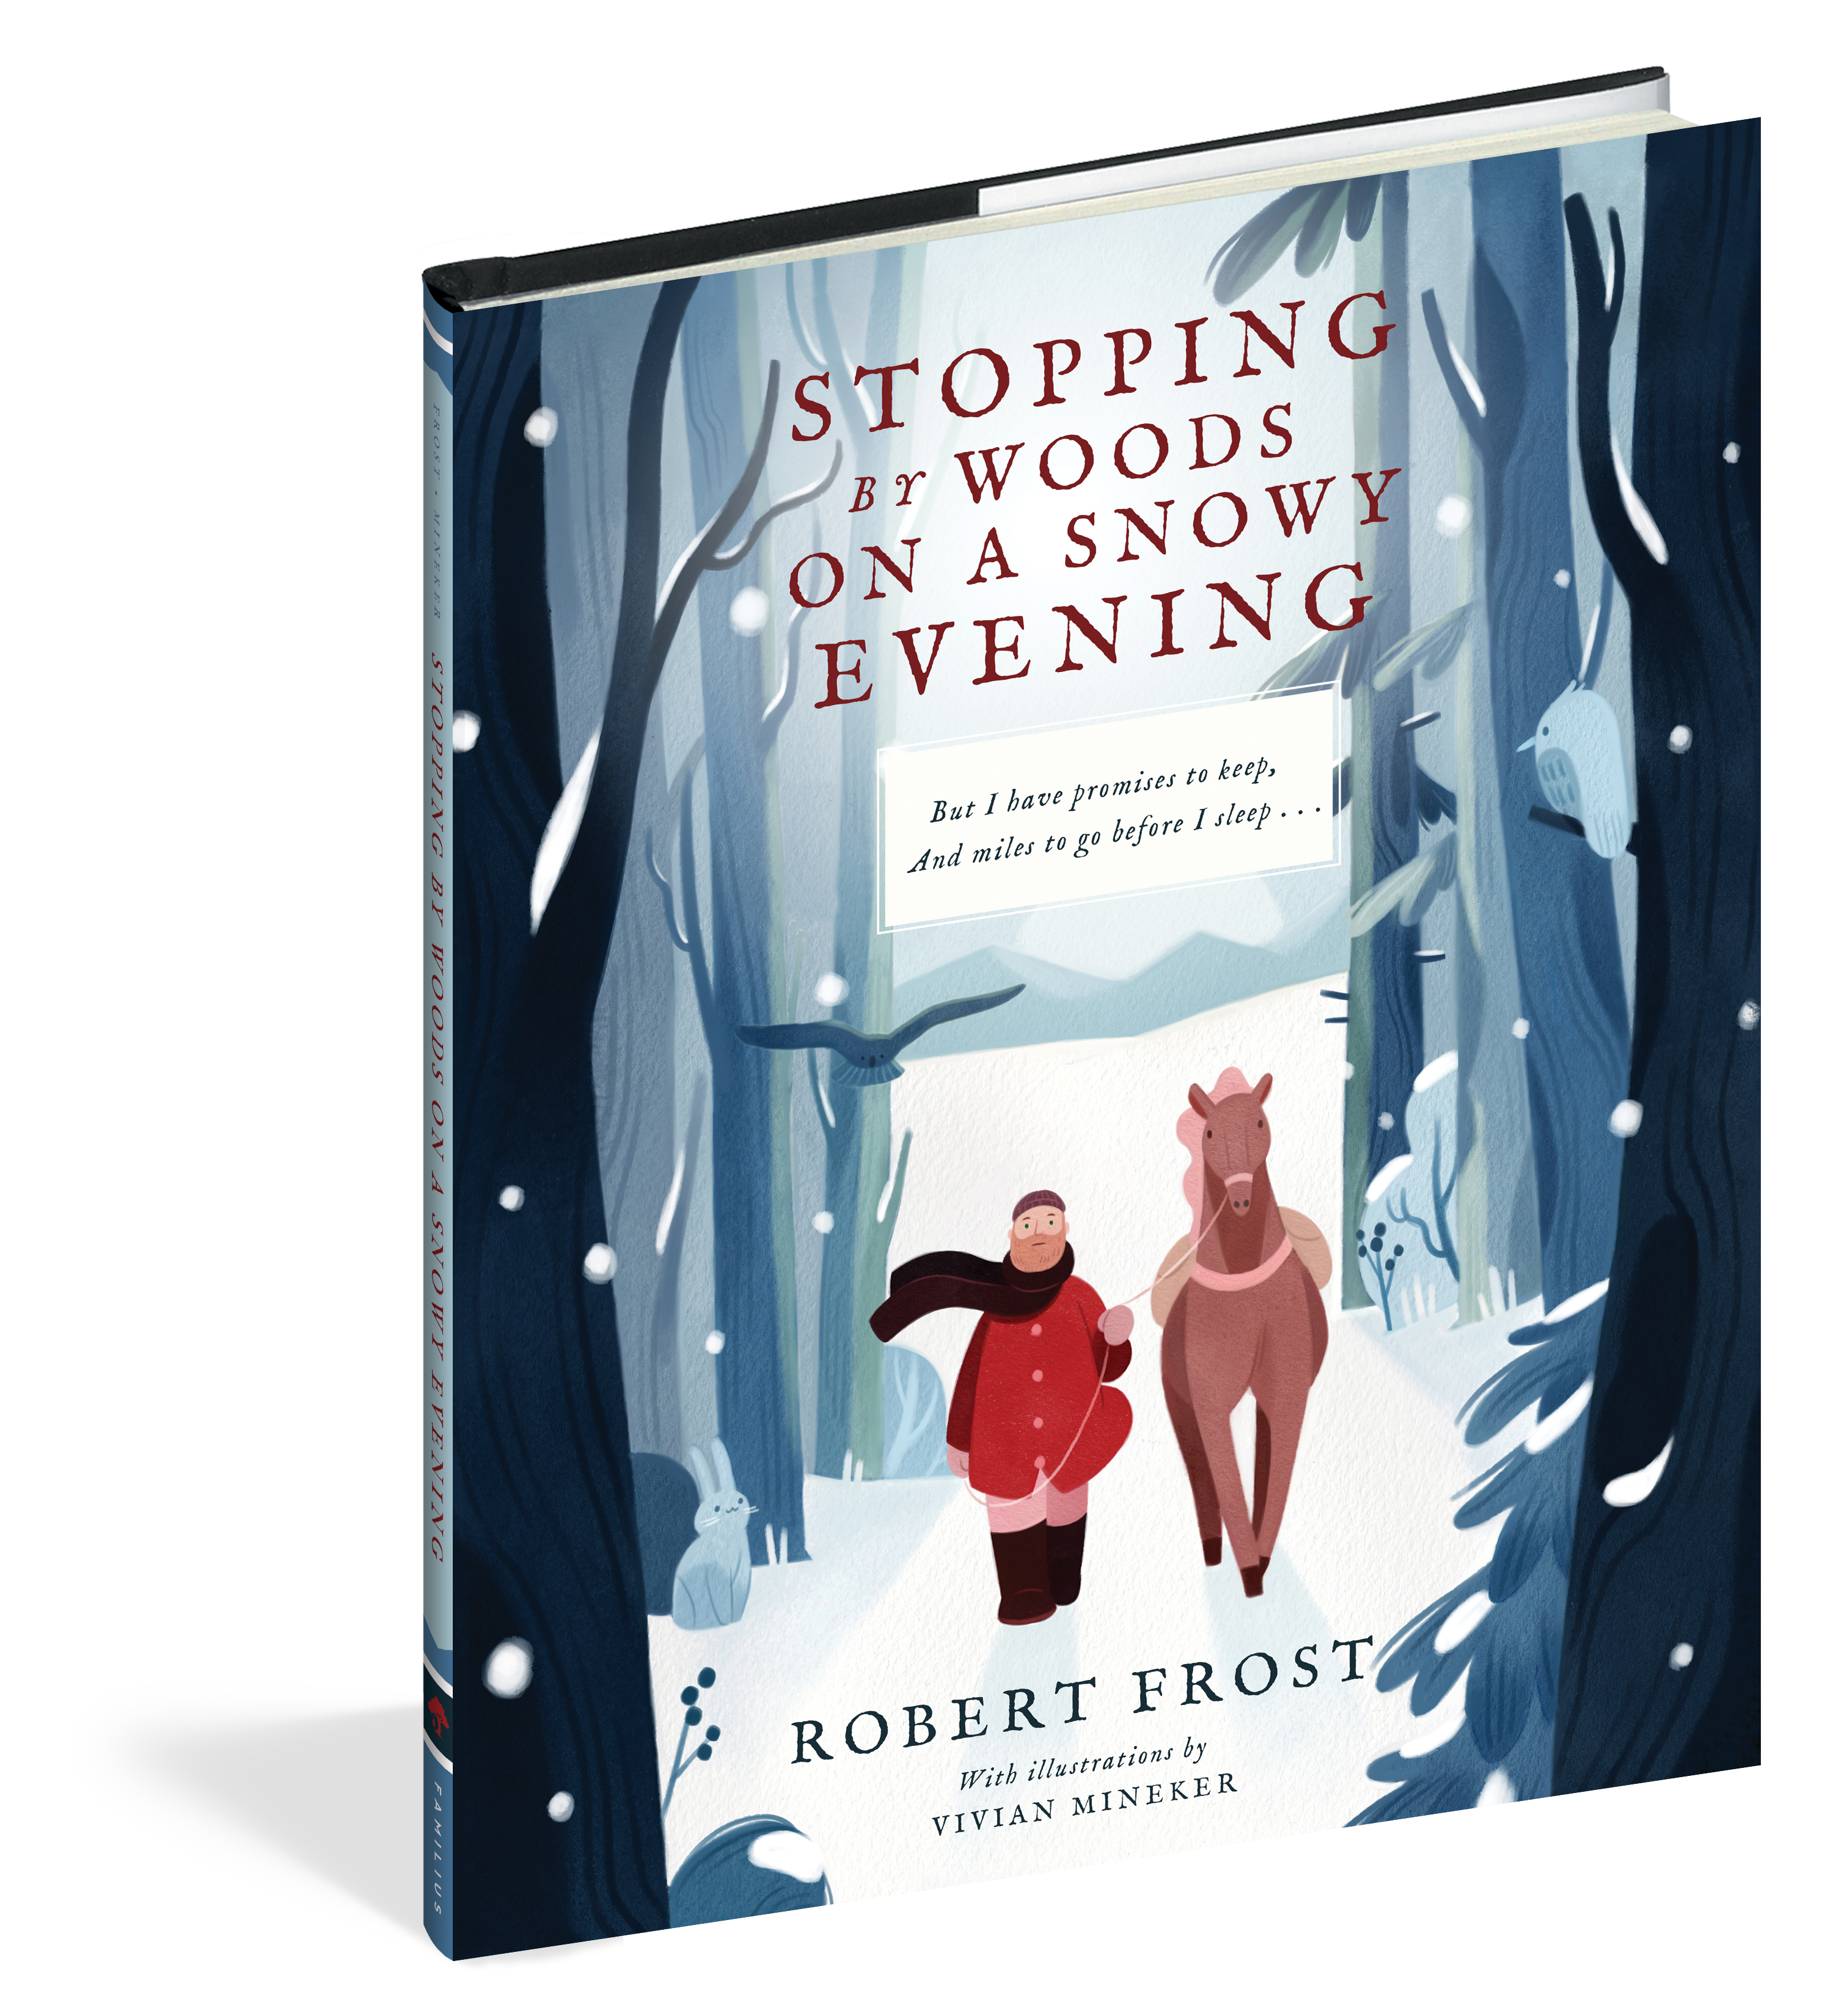 The cover of the picture book Stopping By Woods on a Snowy Evening.